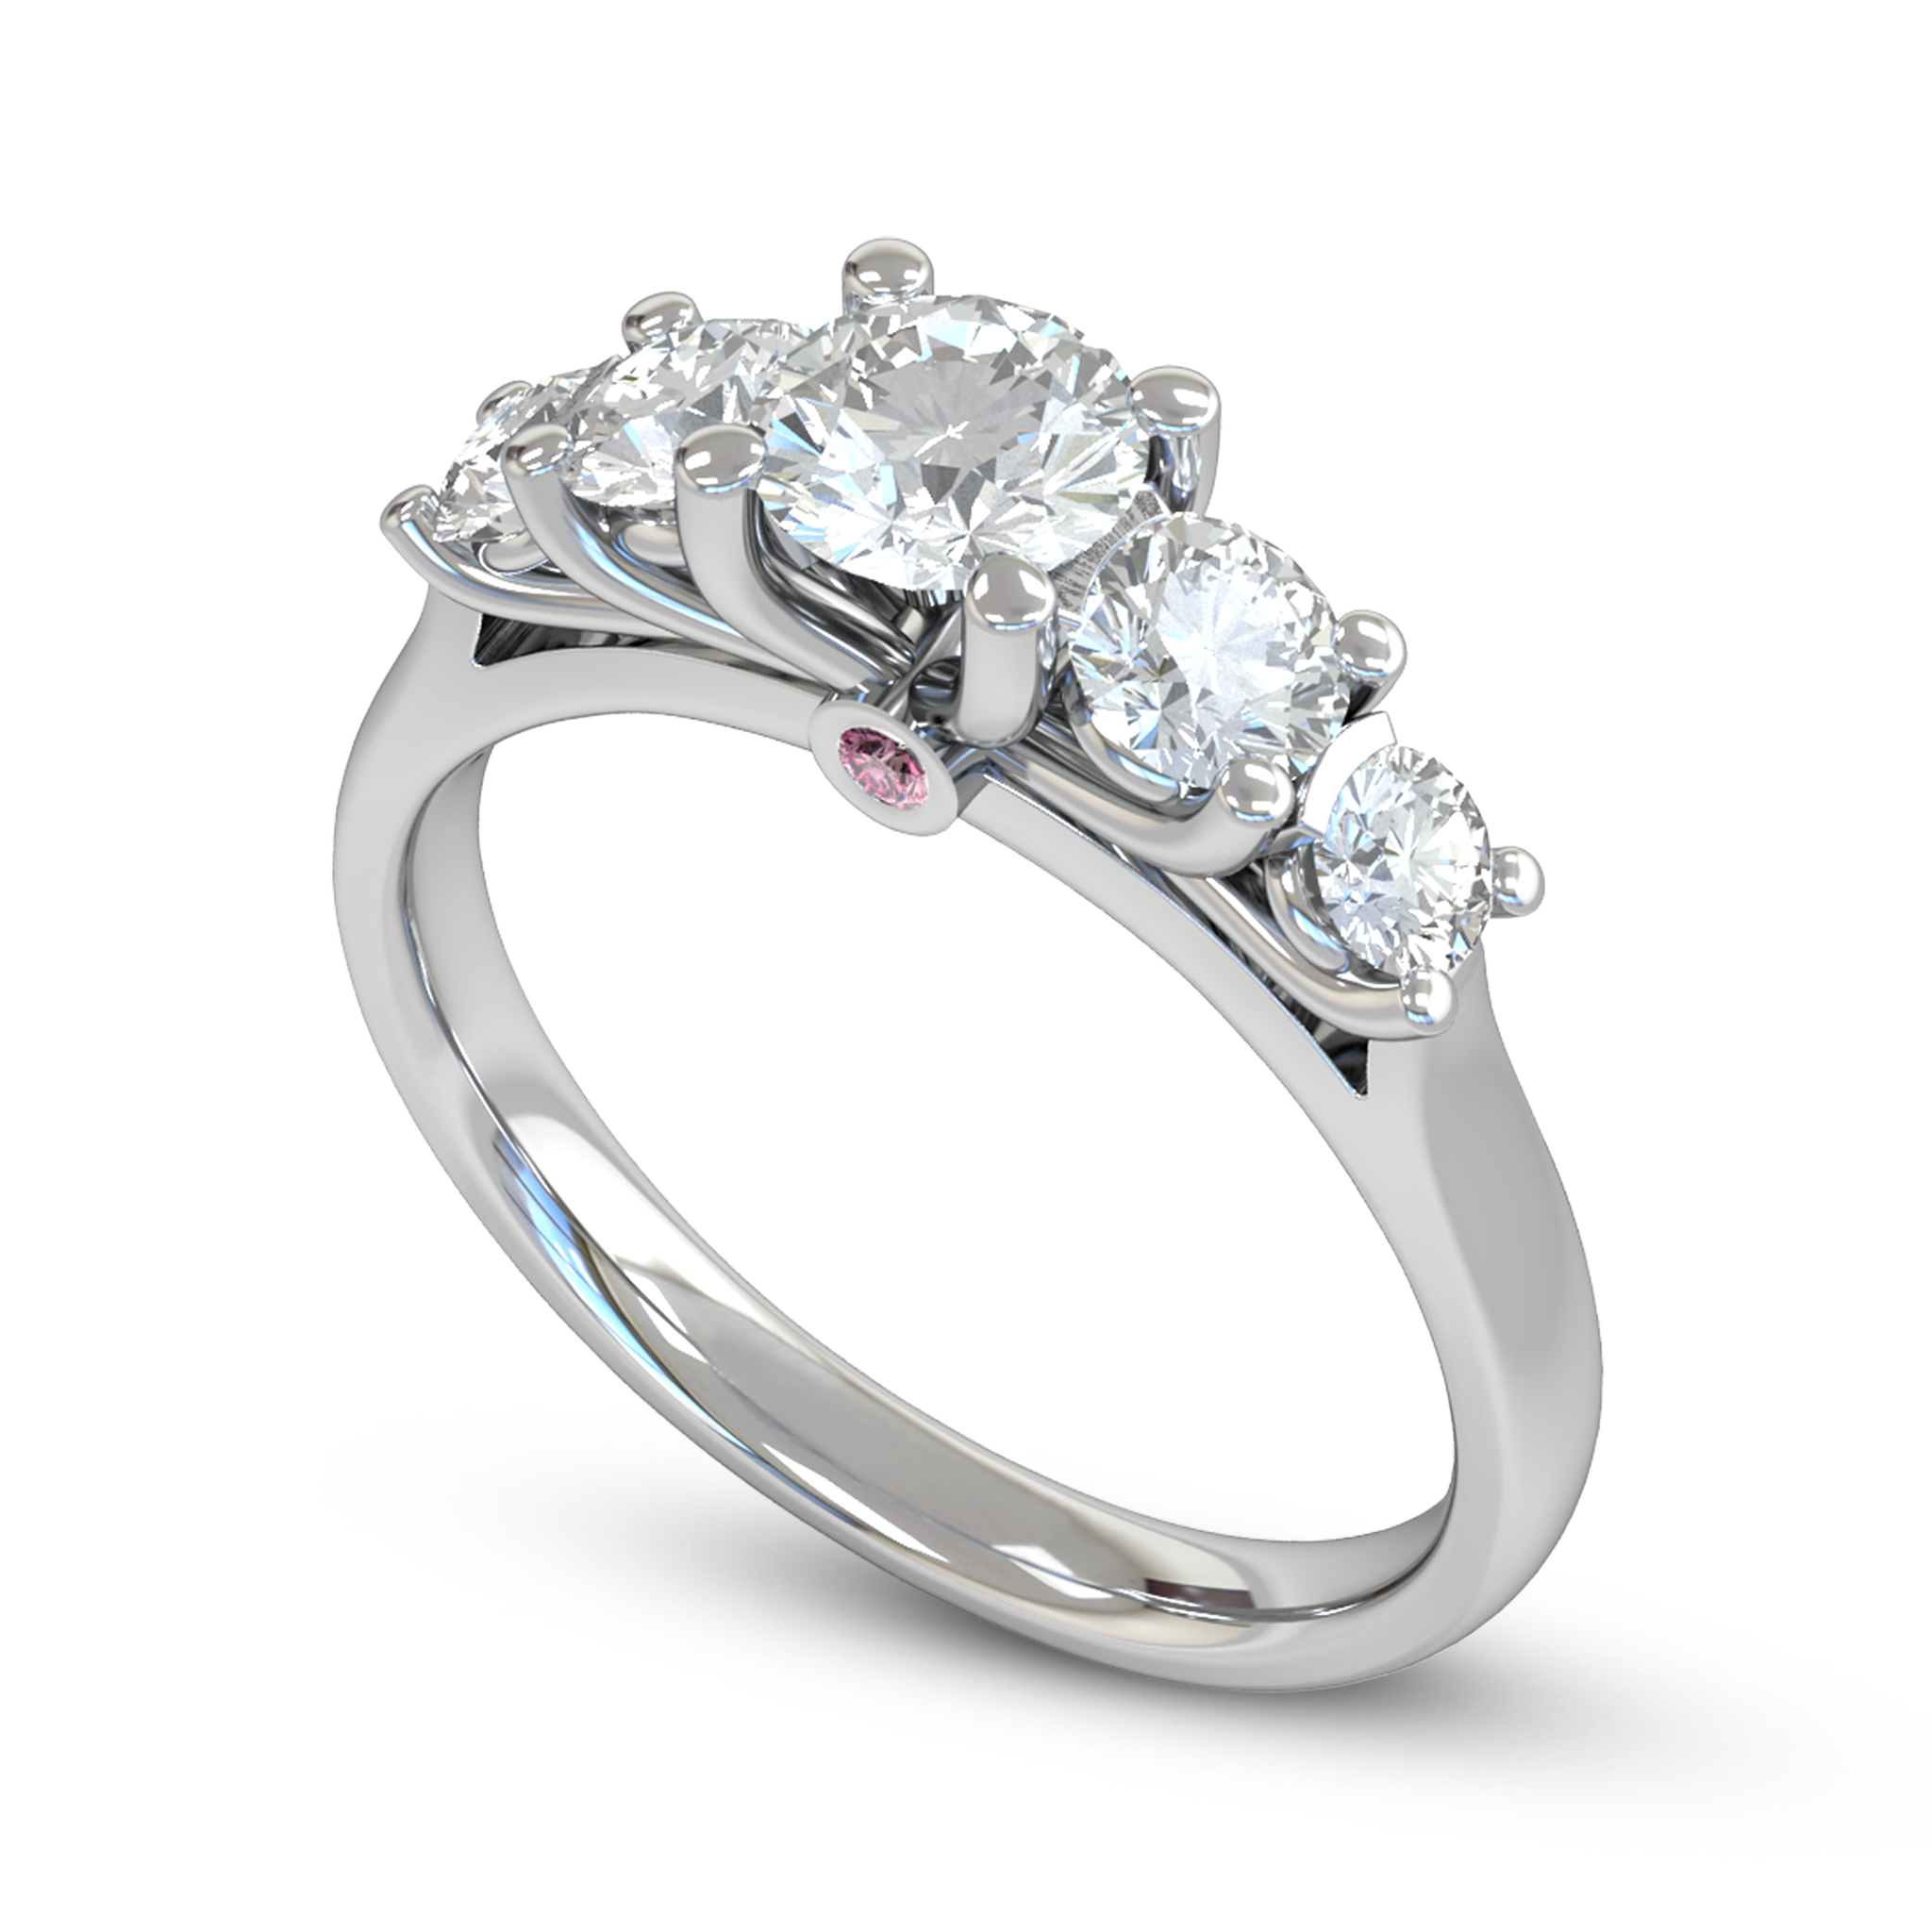 Five Graces Diamond Fairtrade Gold Engagement Ring in